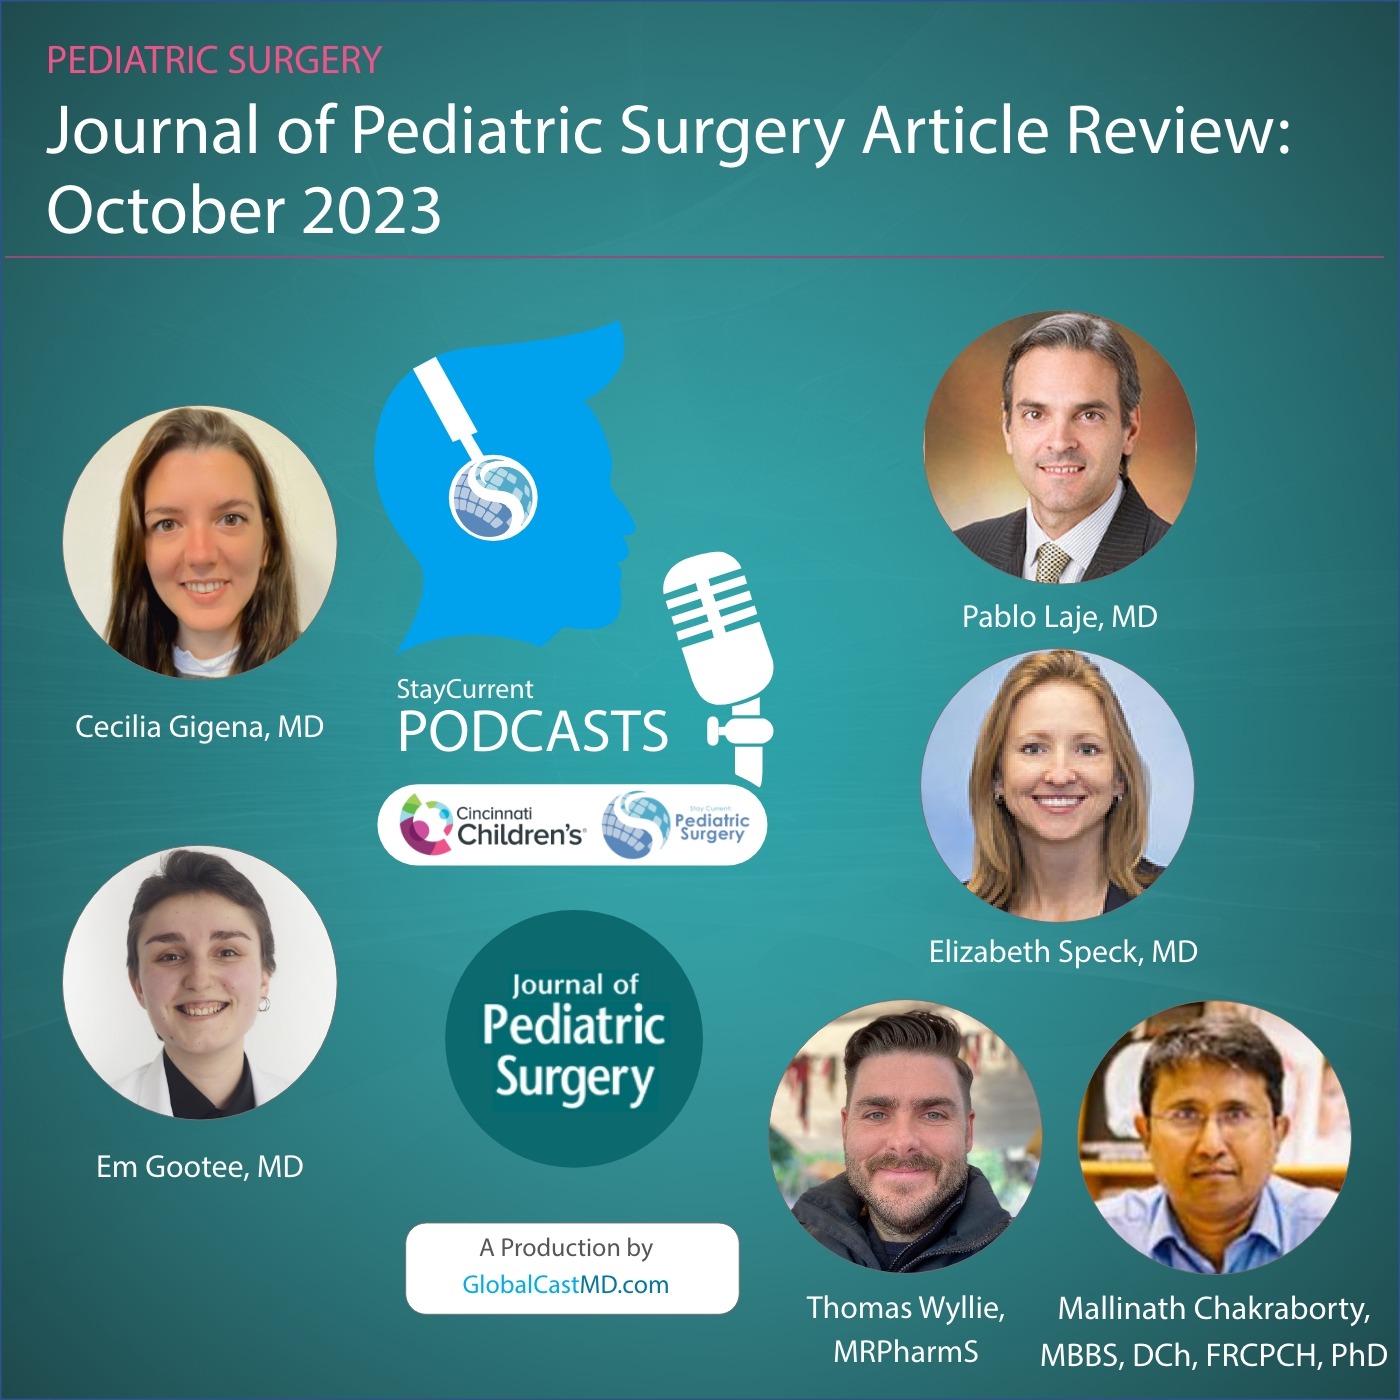 Journal of Pediatric Surgery Article Review: October 2023